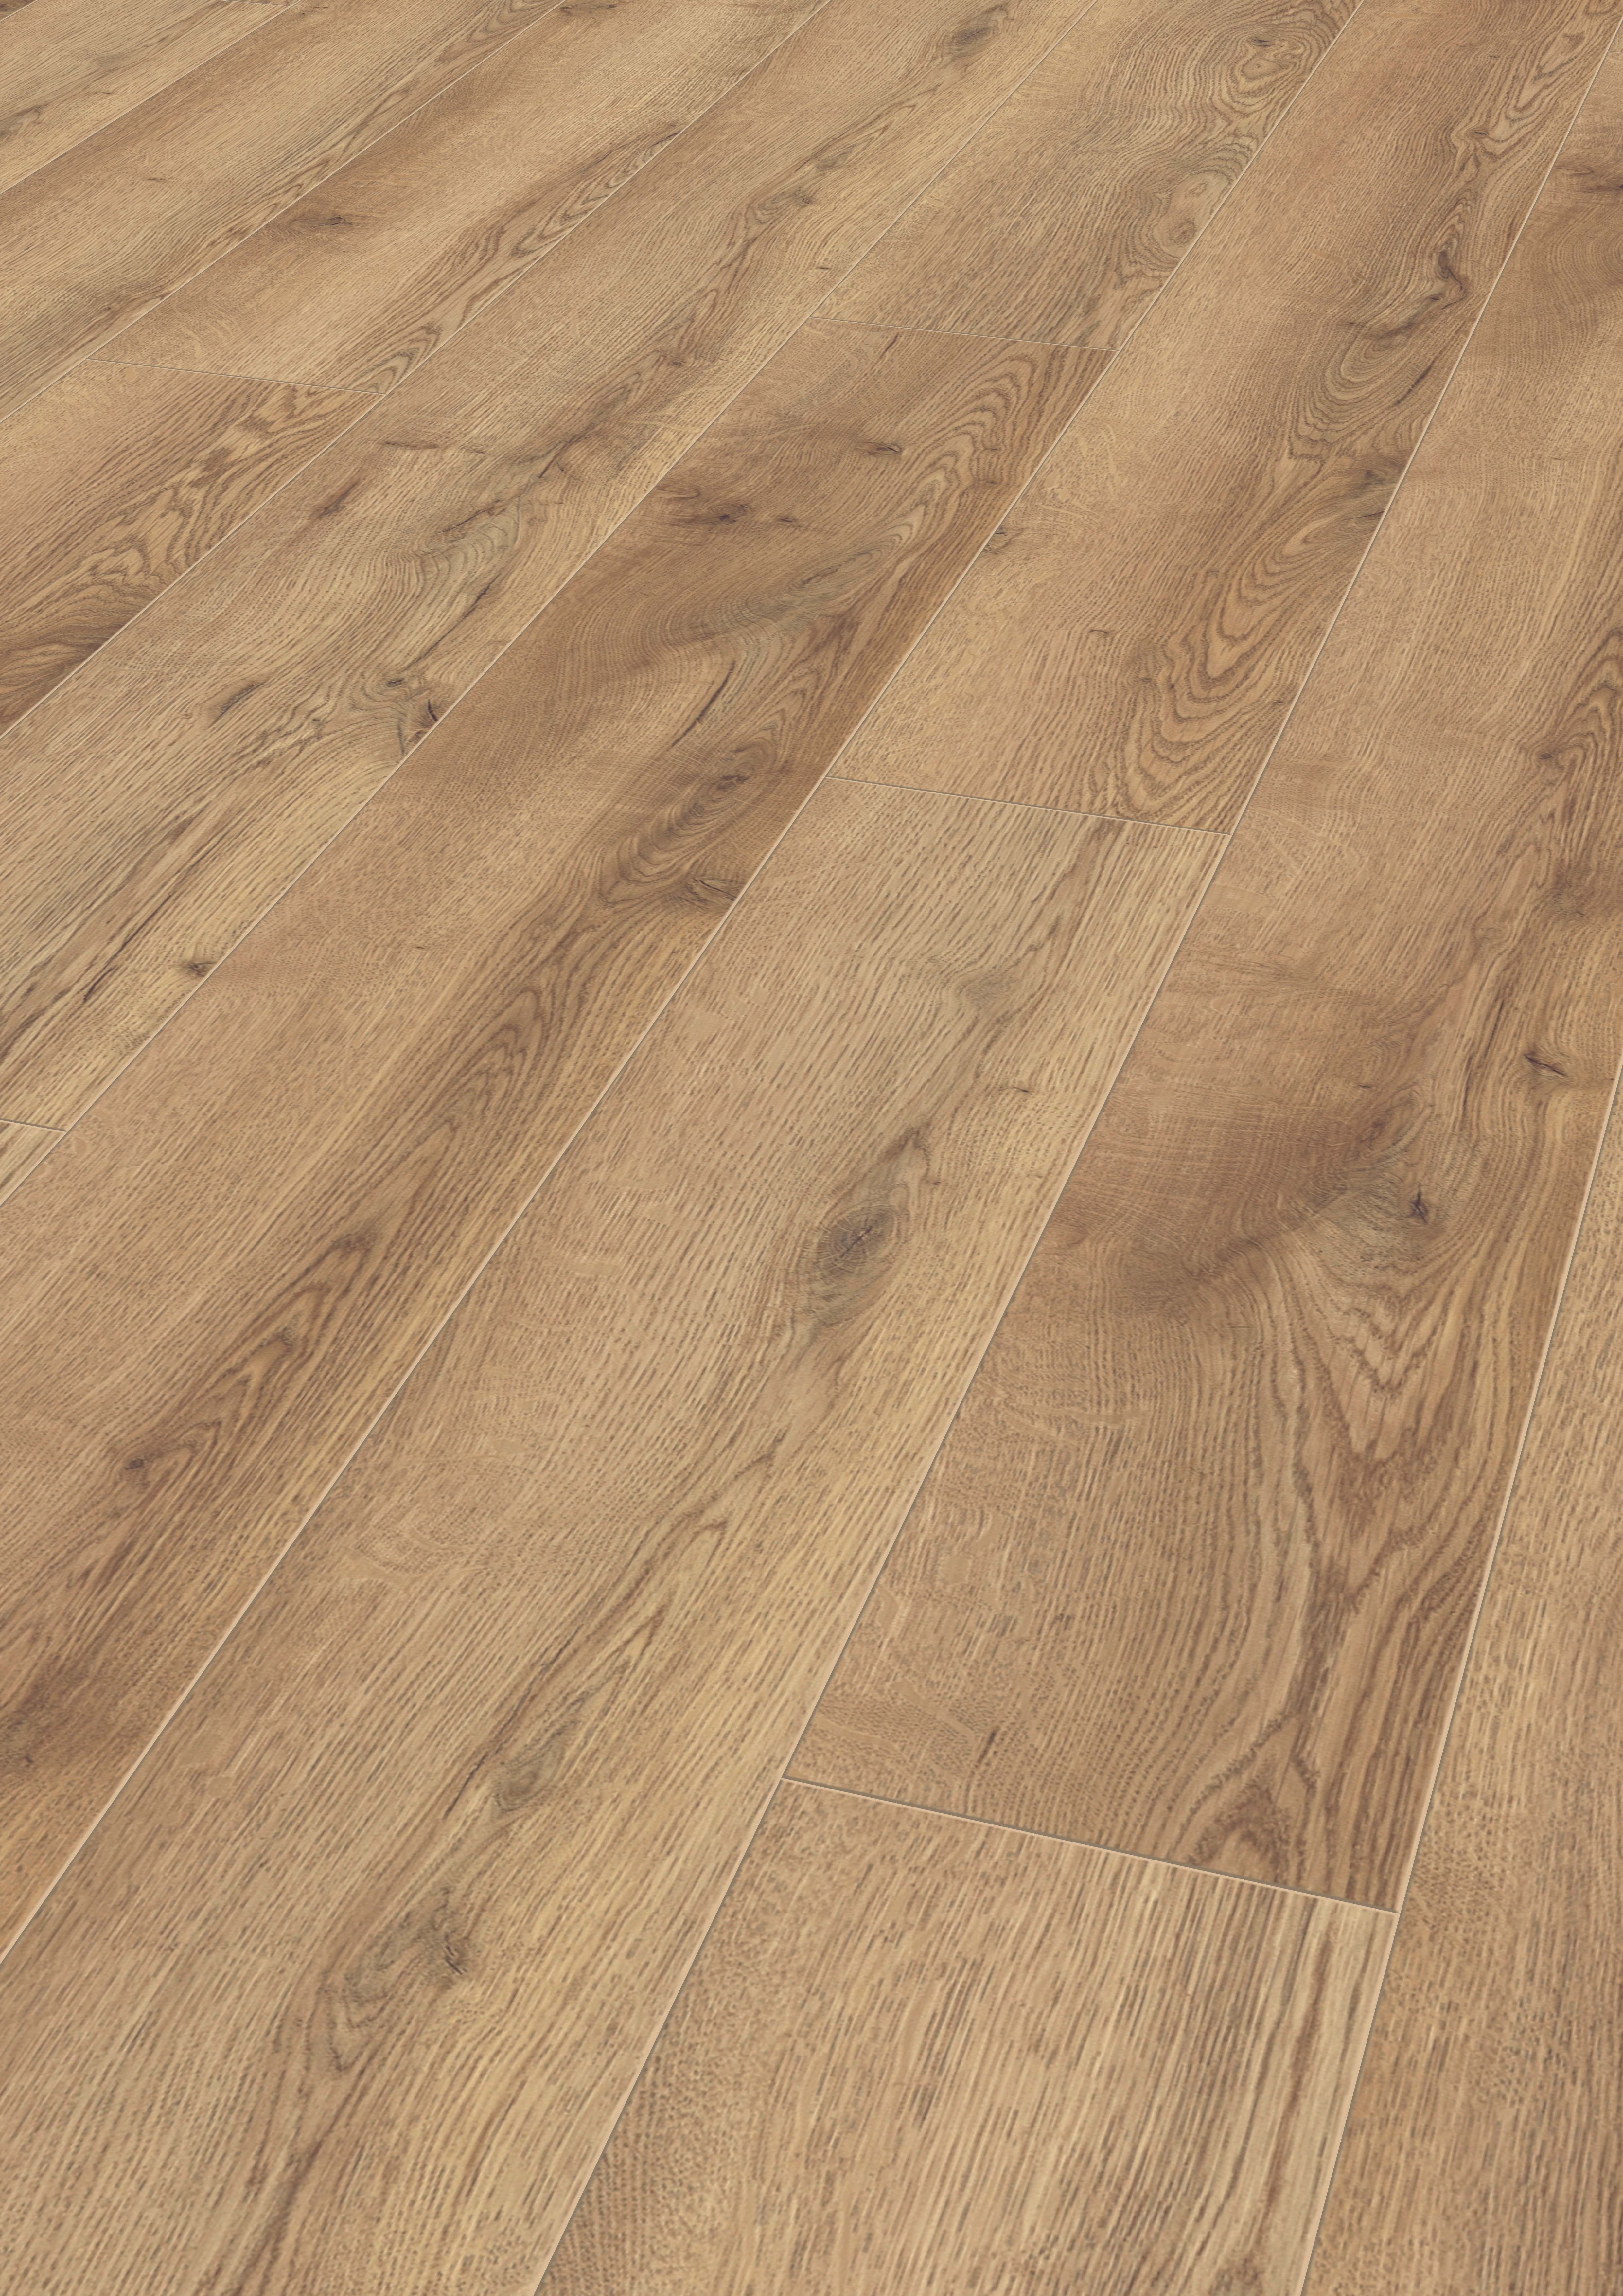 25 Elegant Hardwood Flooring Clearance Ontario 2024 free download hardwood flooring clearance ontario of mammut laminate flooring in country house plank style kronotex in download picture amp